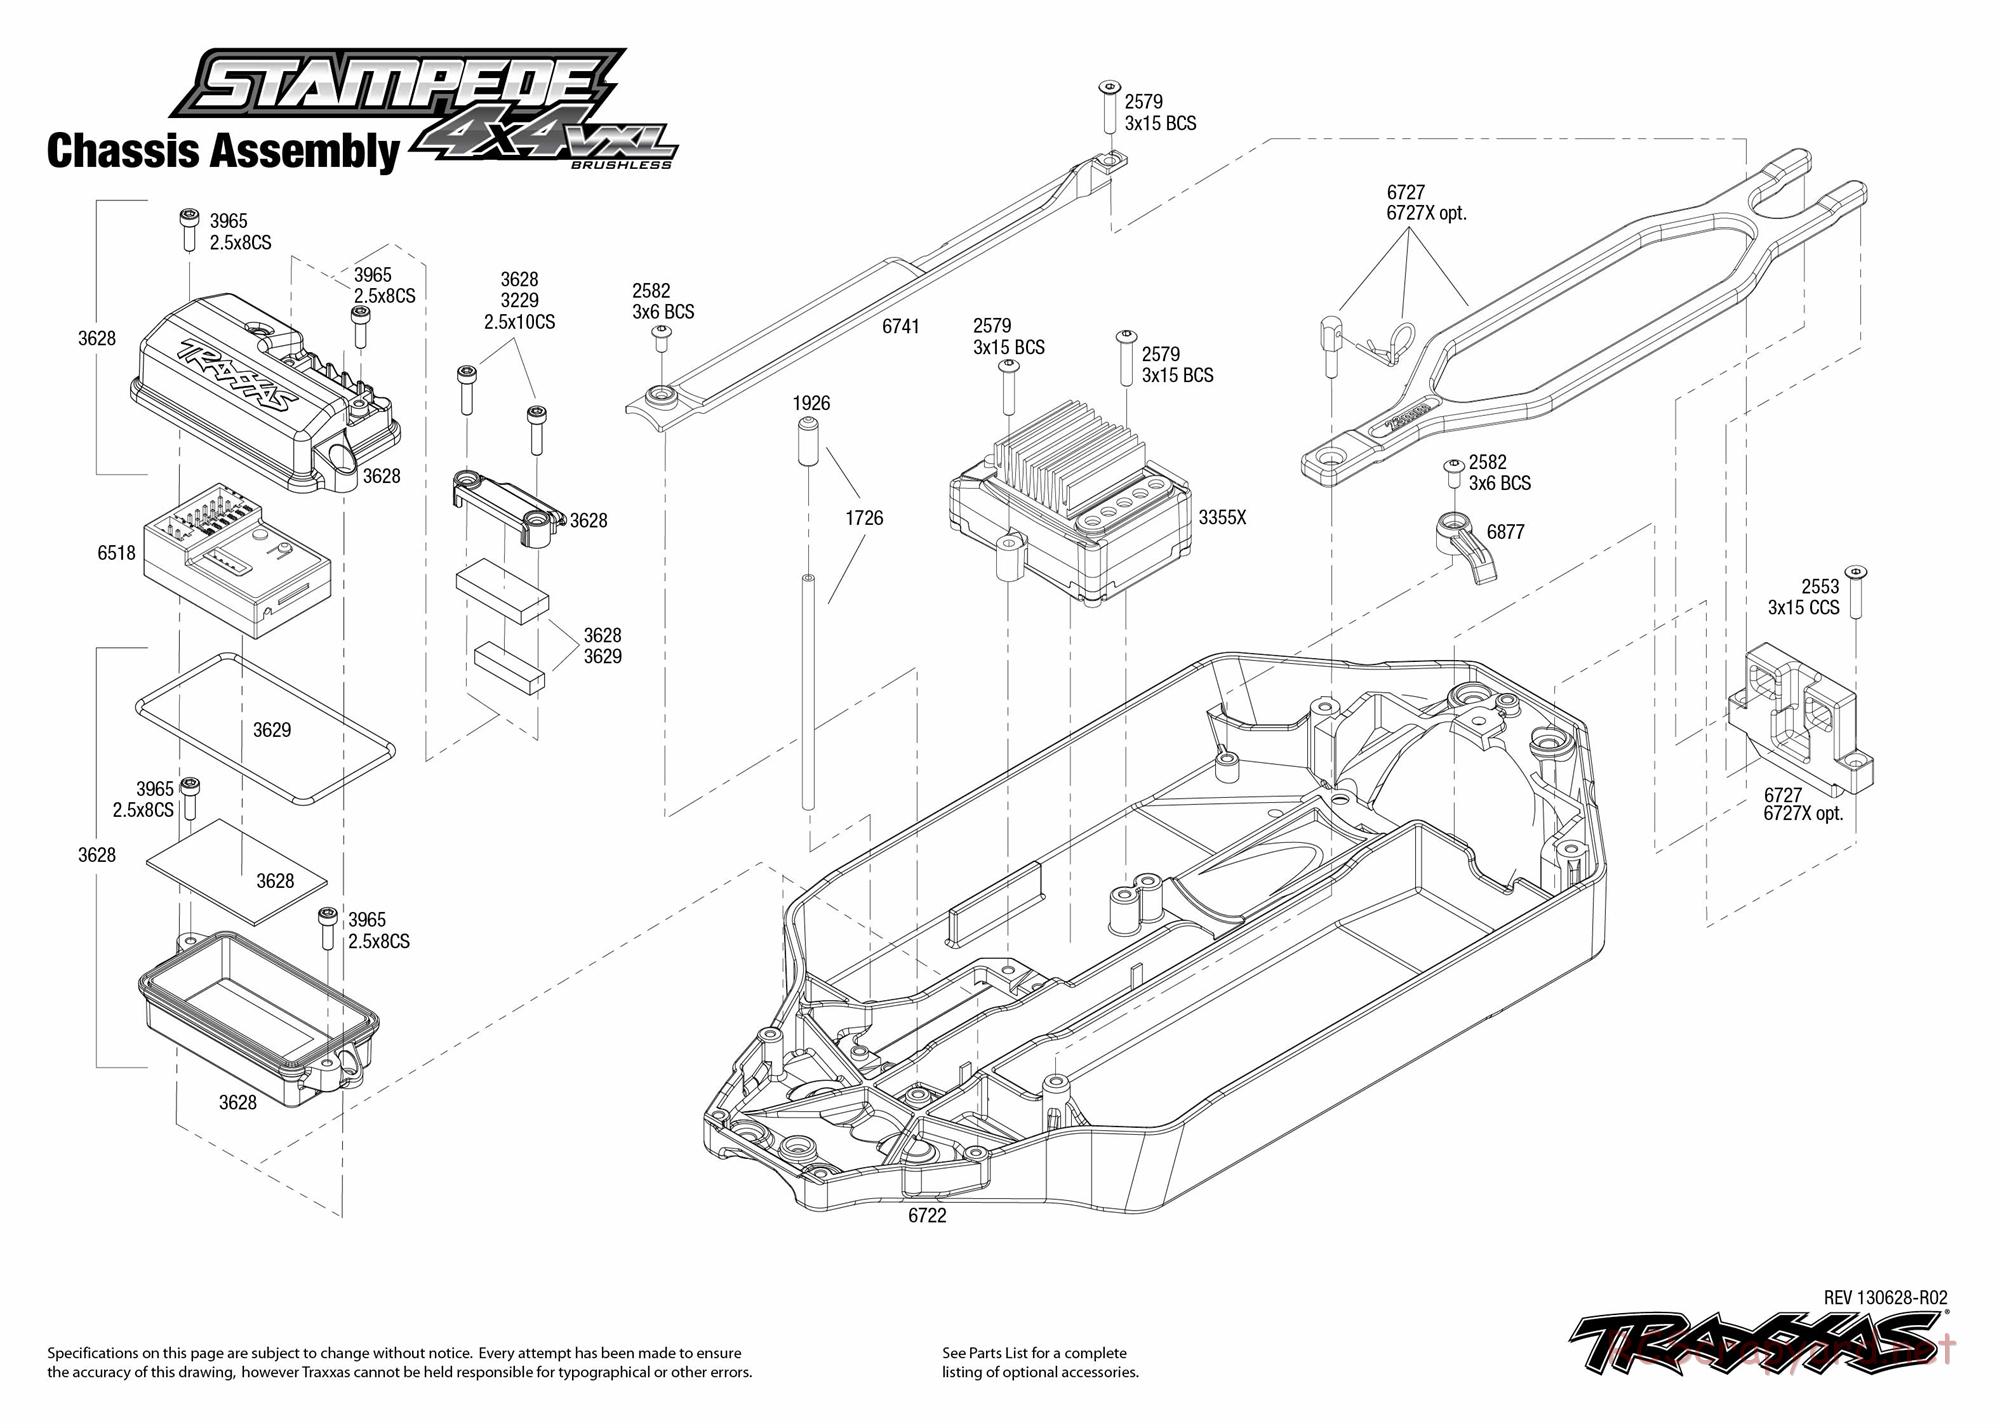 Traxxas - Stampede 4x4 VXL (2012) - Exploded Views - Page 1